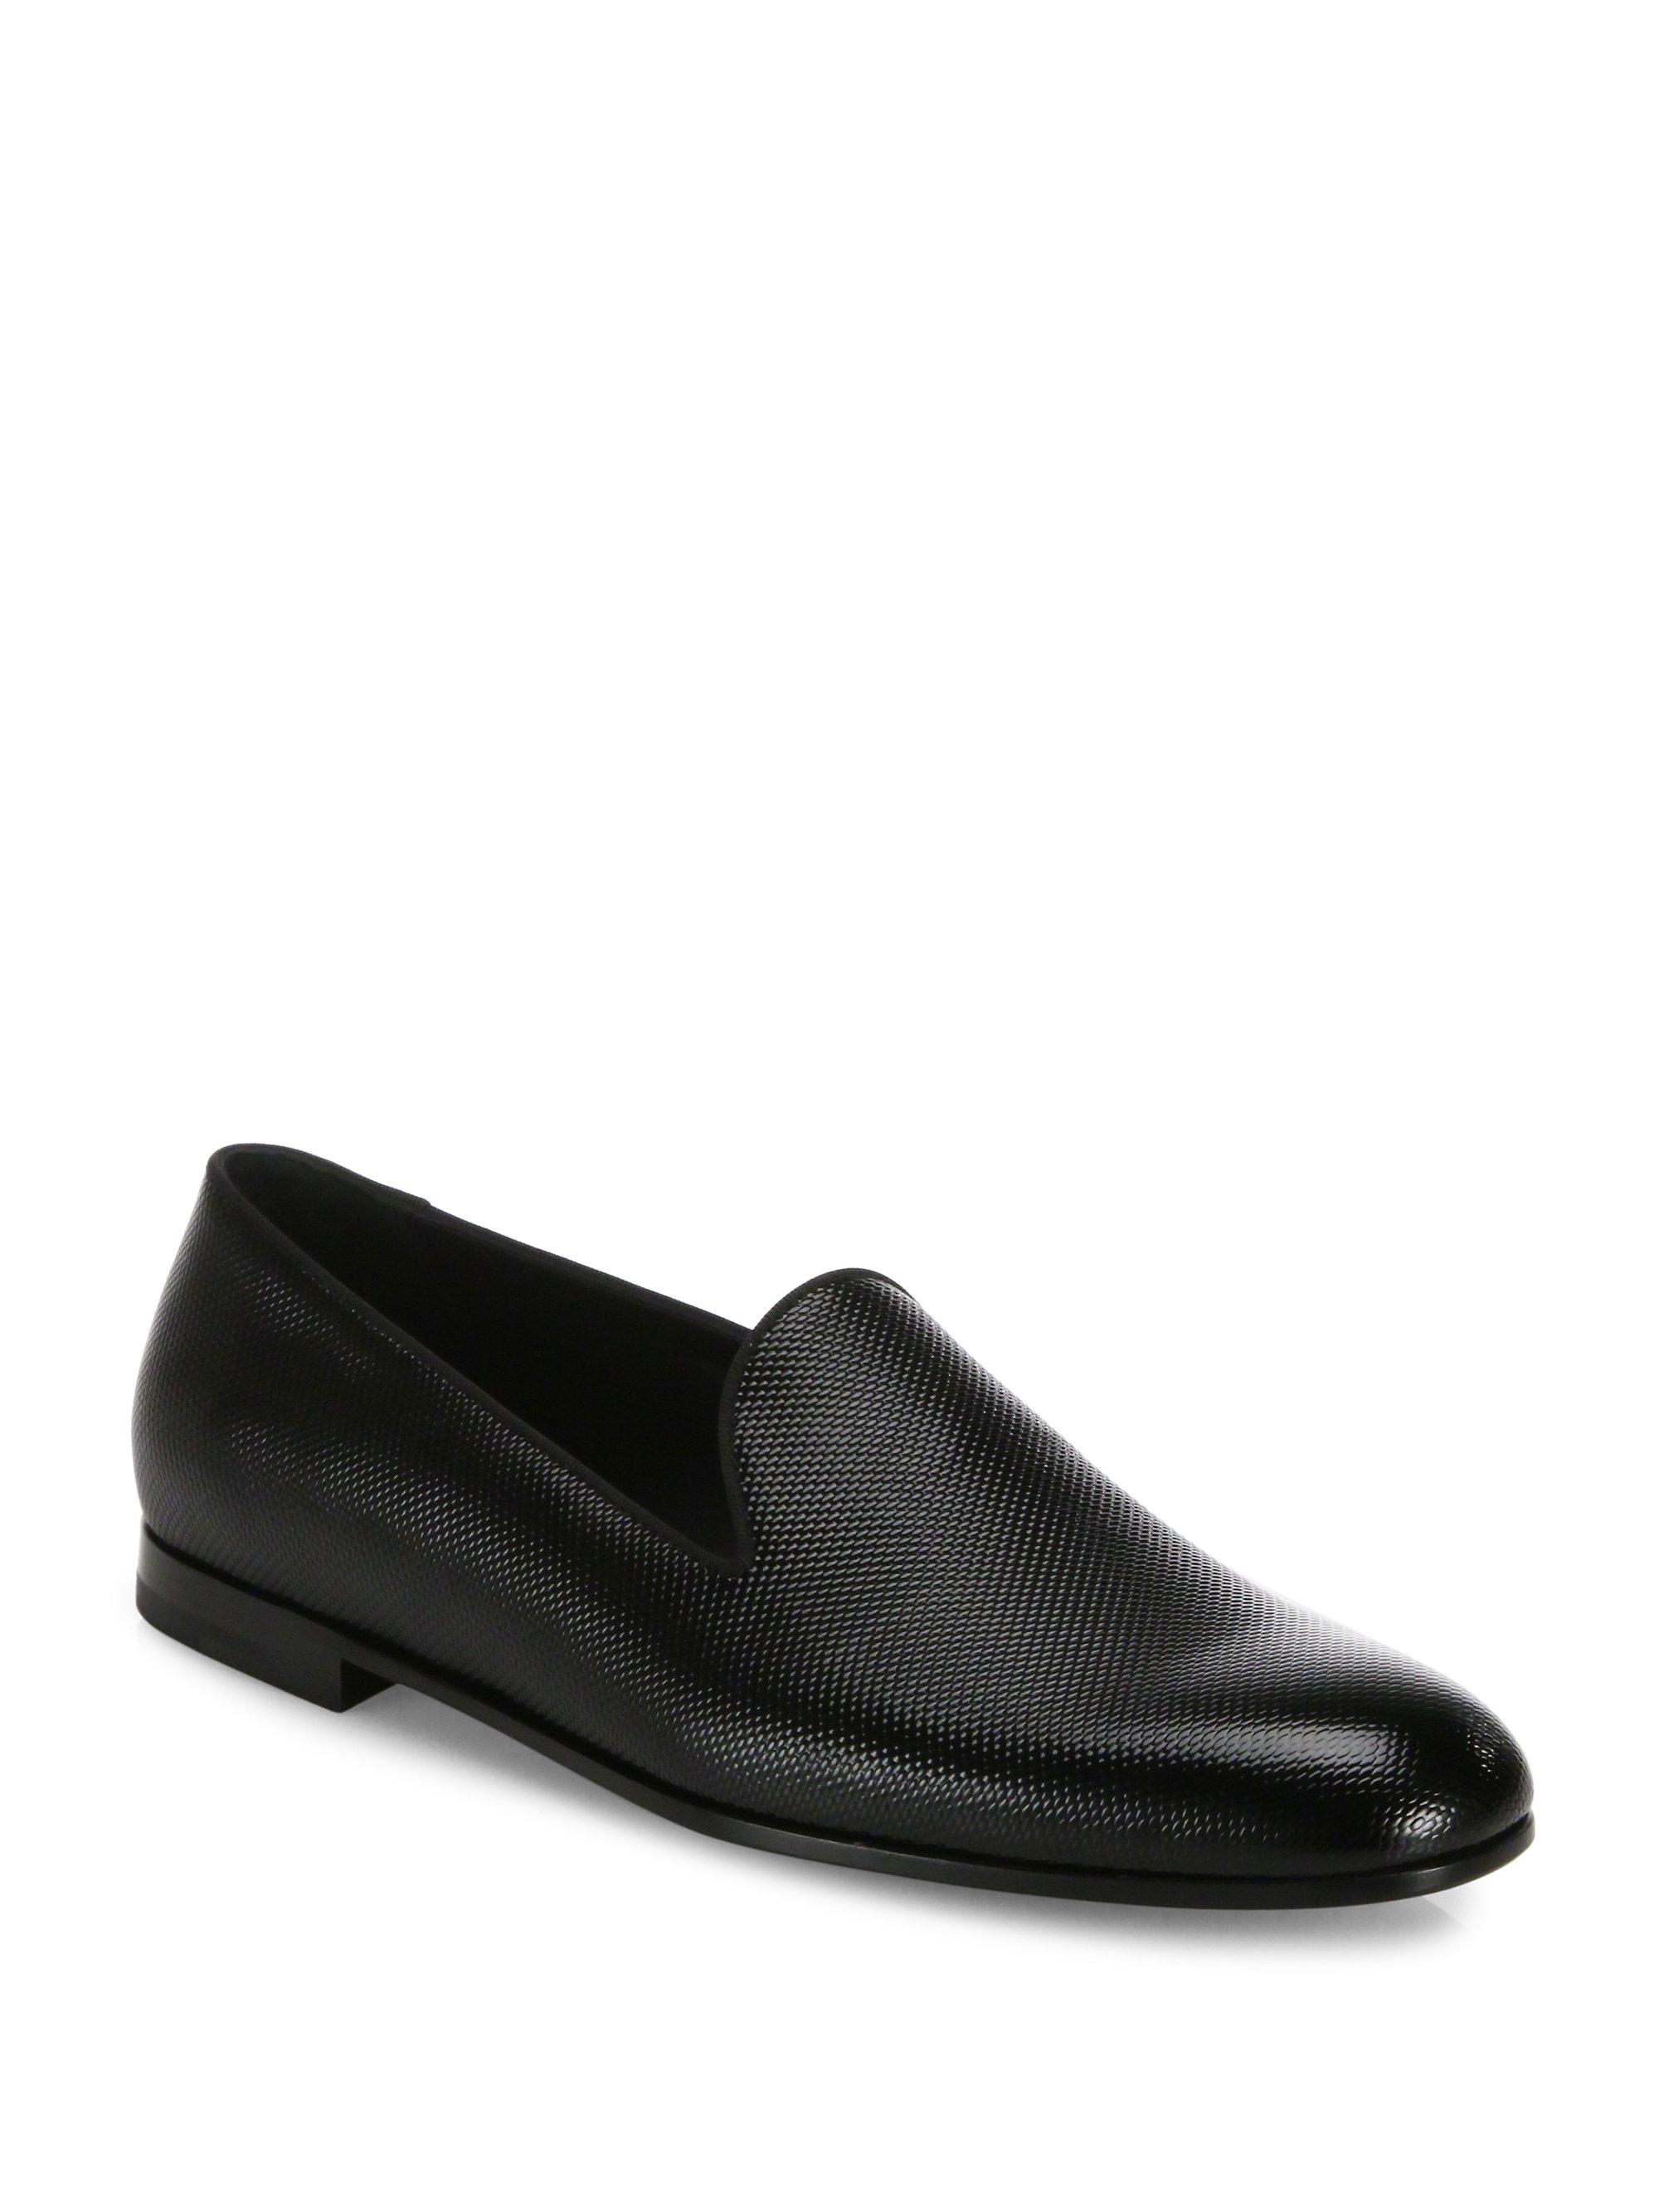 Lyst - Giorgio Armani Textured Patent Leather Slip-on Dress Shoes in ...